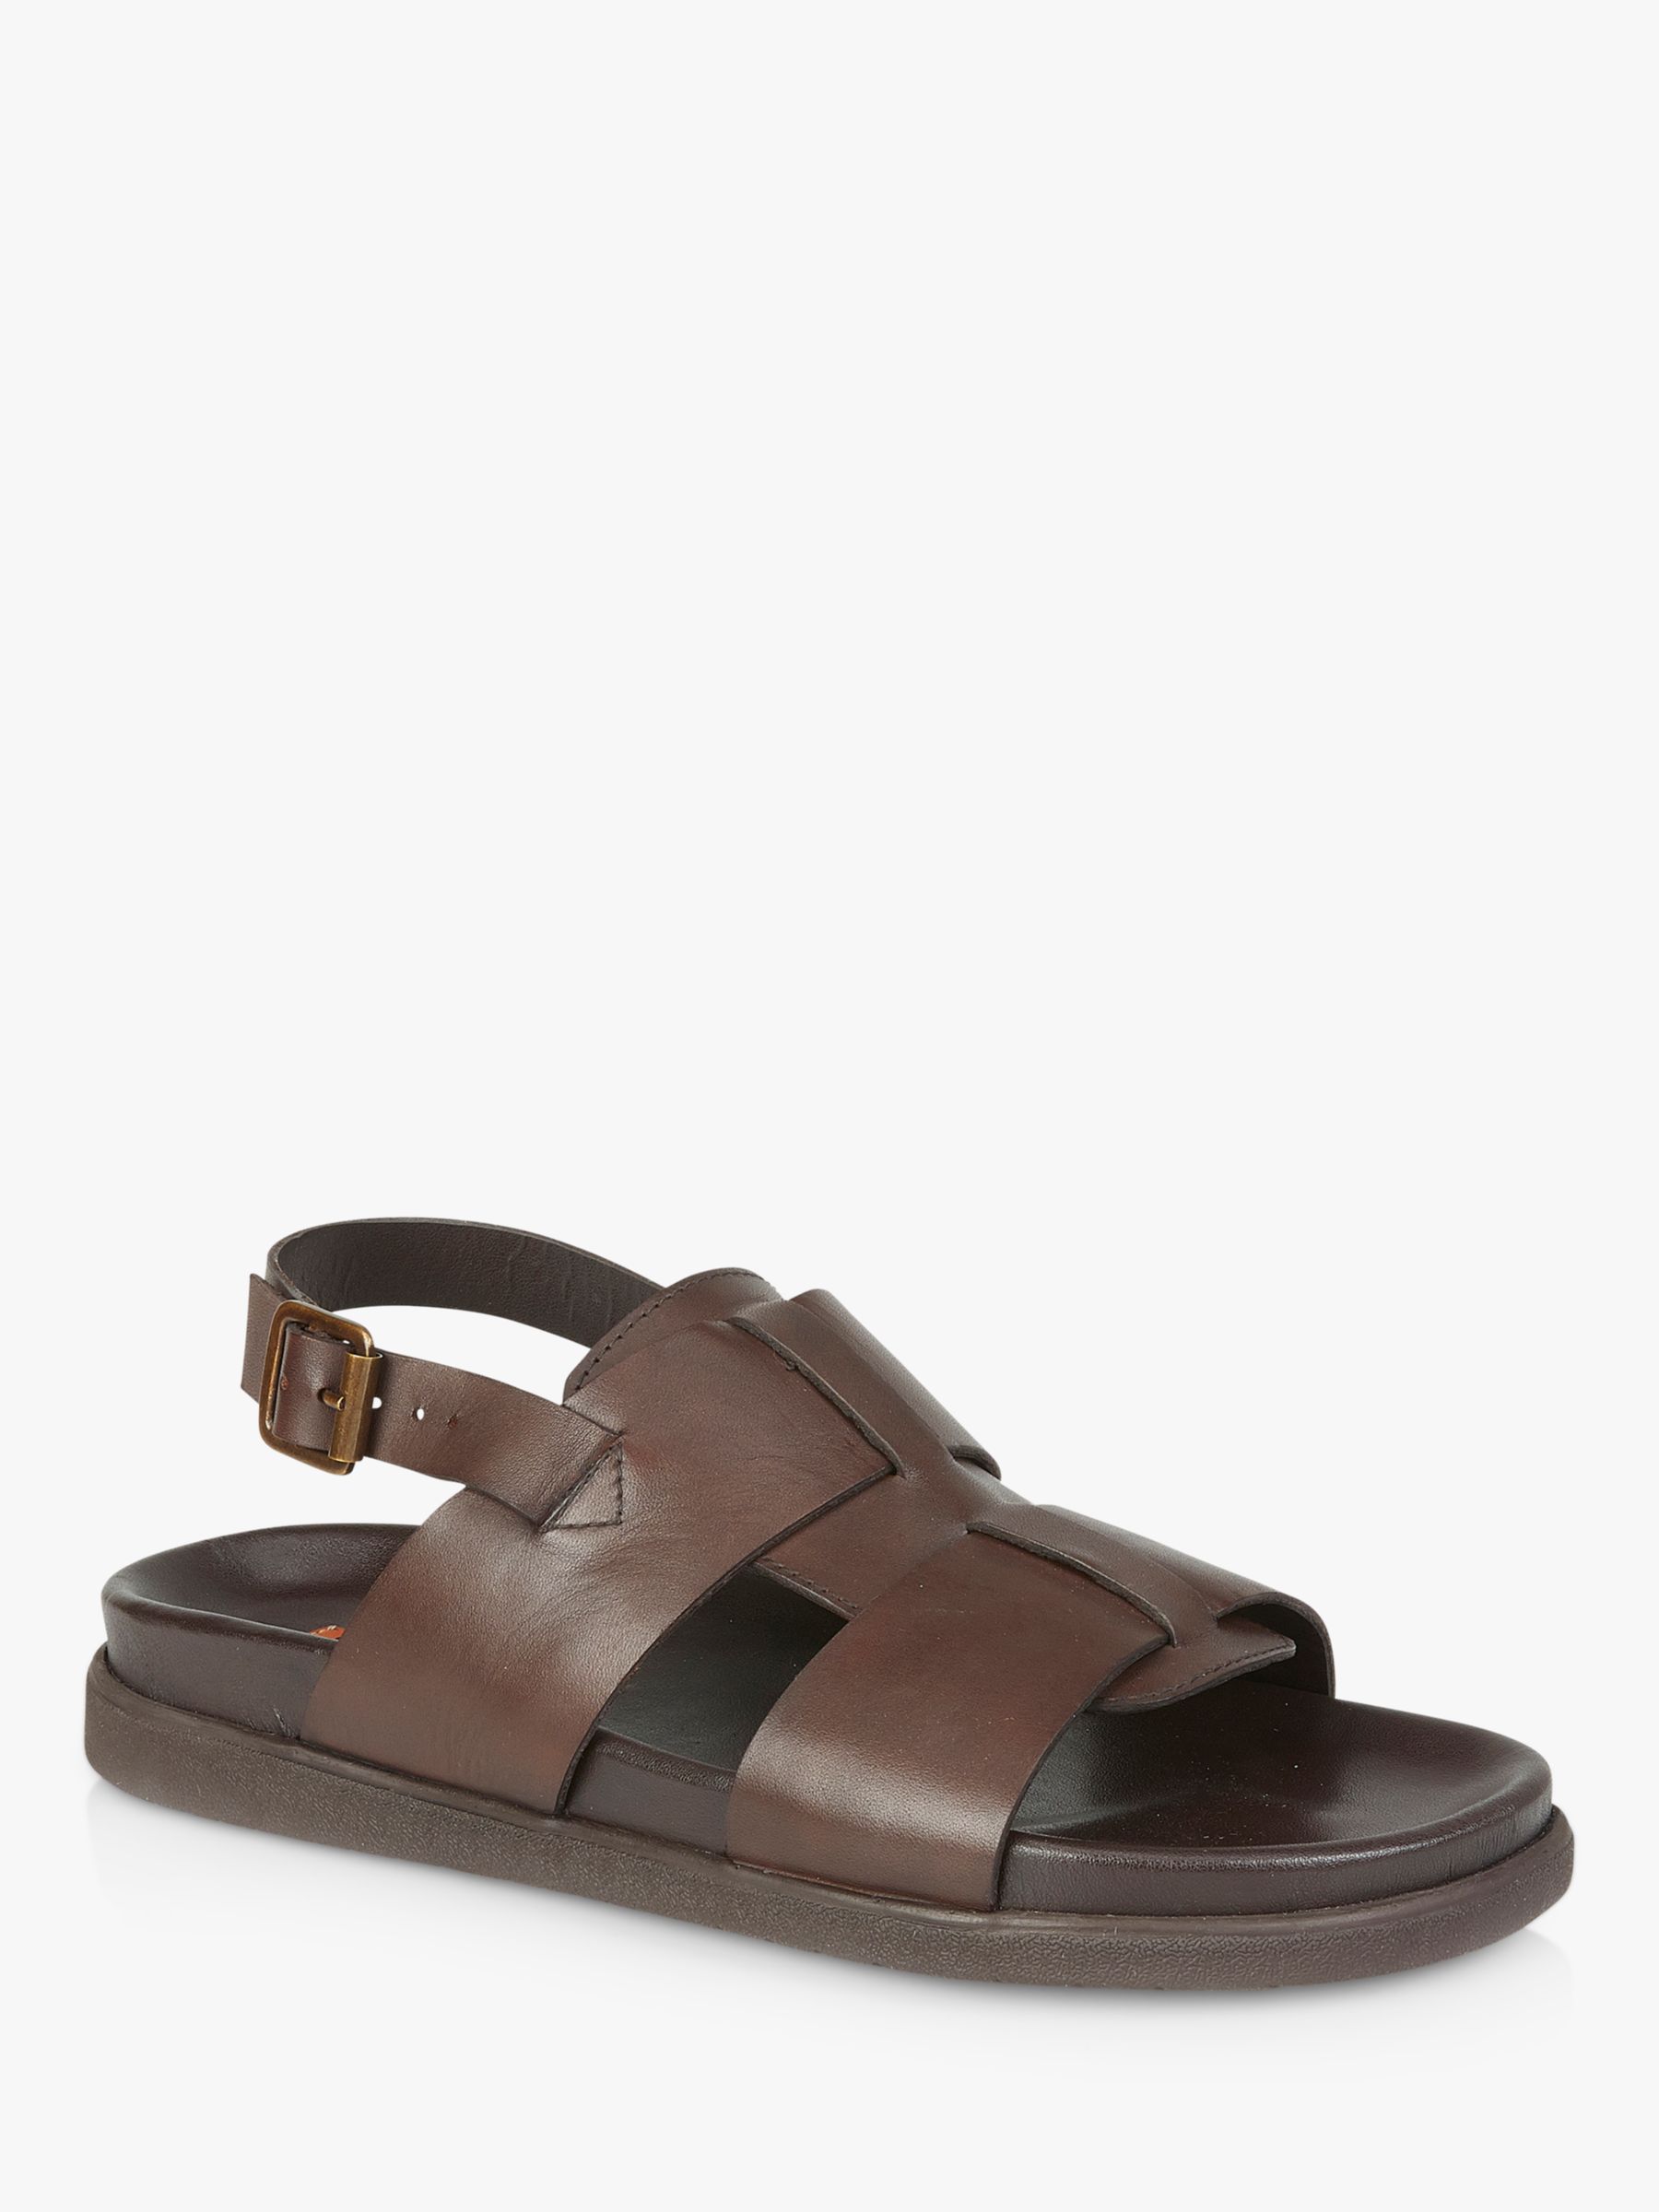 Silver Street London Tuscon Leather Sandals, Brown, 7